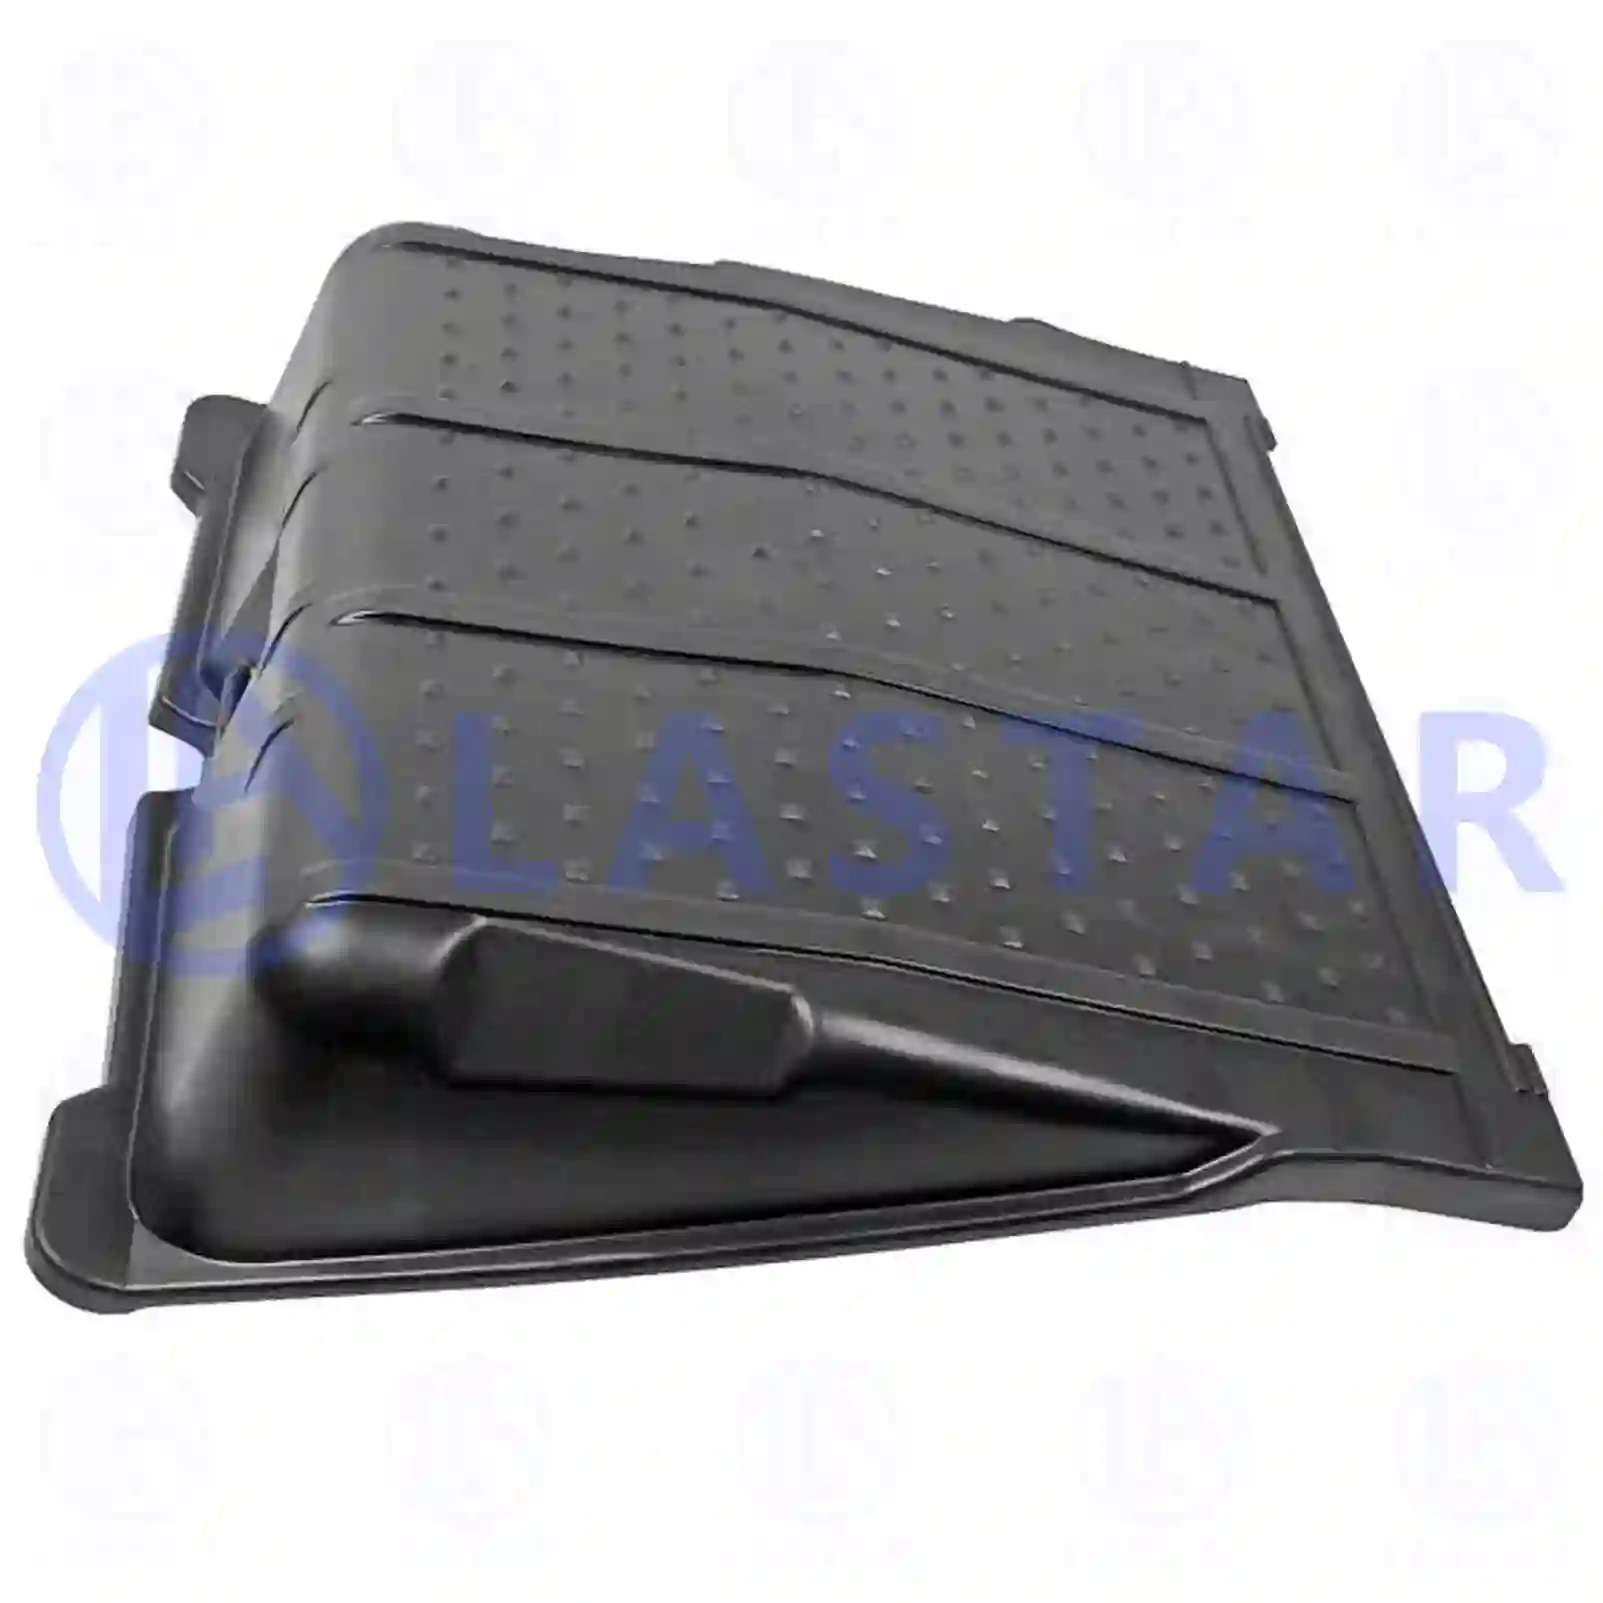 Battery cover, 77711755, 6205410303 ||  77711755 Lastar Spare Part | Truck Spare Parts, Auotomotive Spare Parts Battery cover, 77711755, 6205410303 ||  77711755 Lastar Spare Part | Truck Spare Parts, Auotomotive Spare Parts